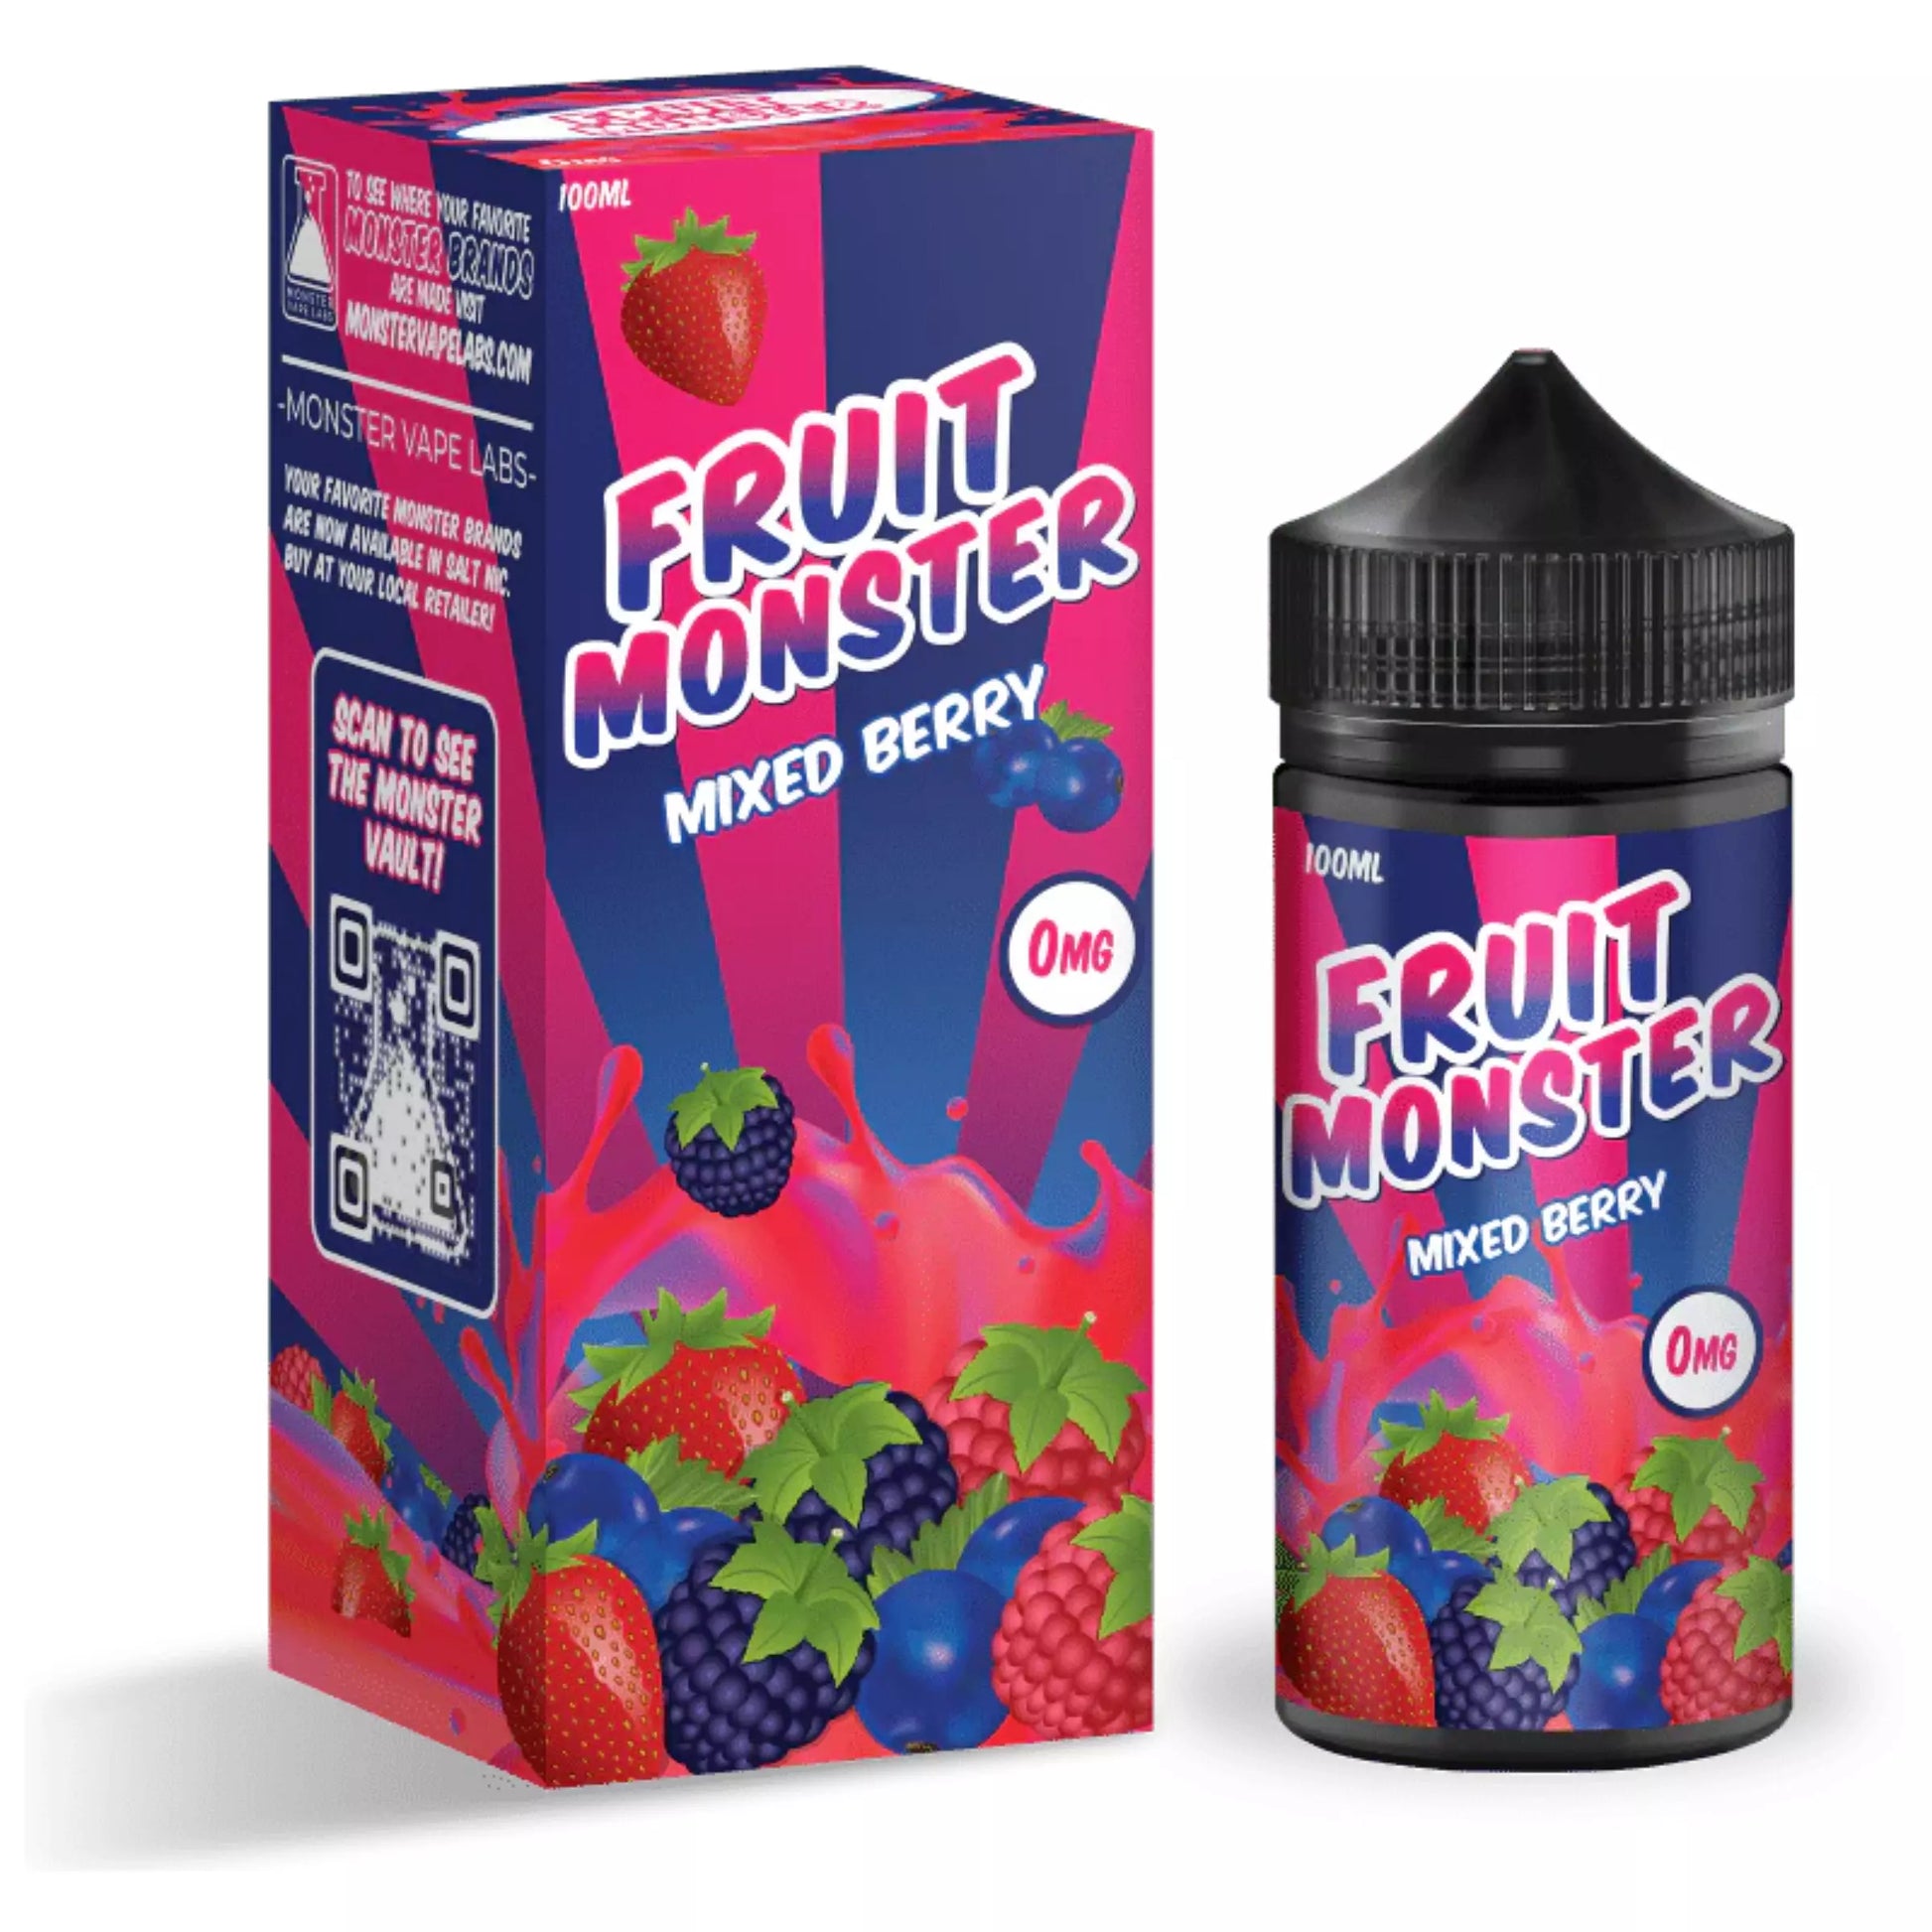 Mixed Berry by Fruit Monster - 100ml